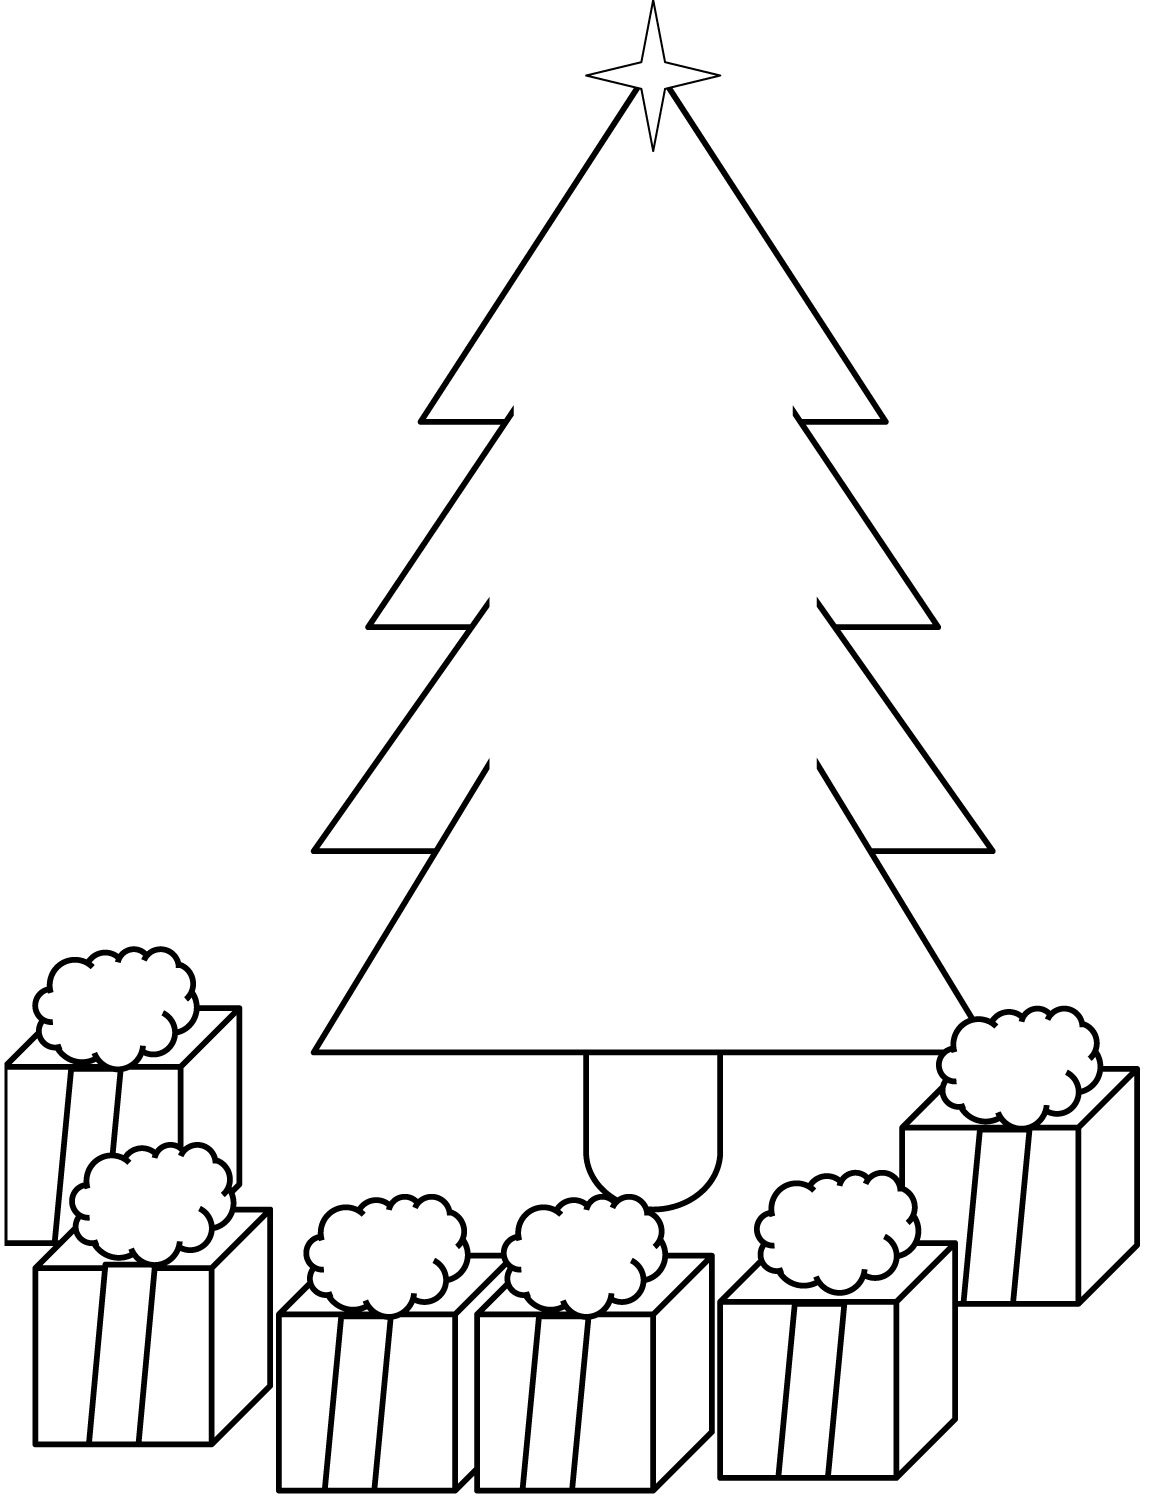 Presents Under Christmas Tree Coloring Pages